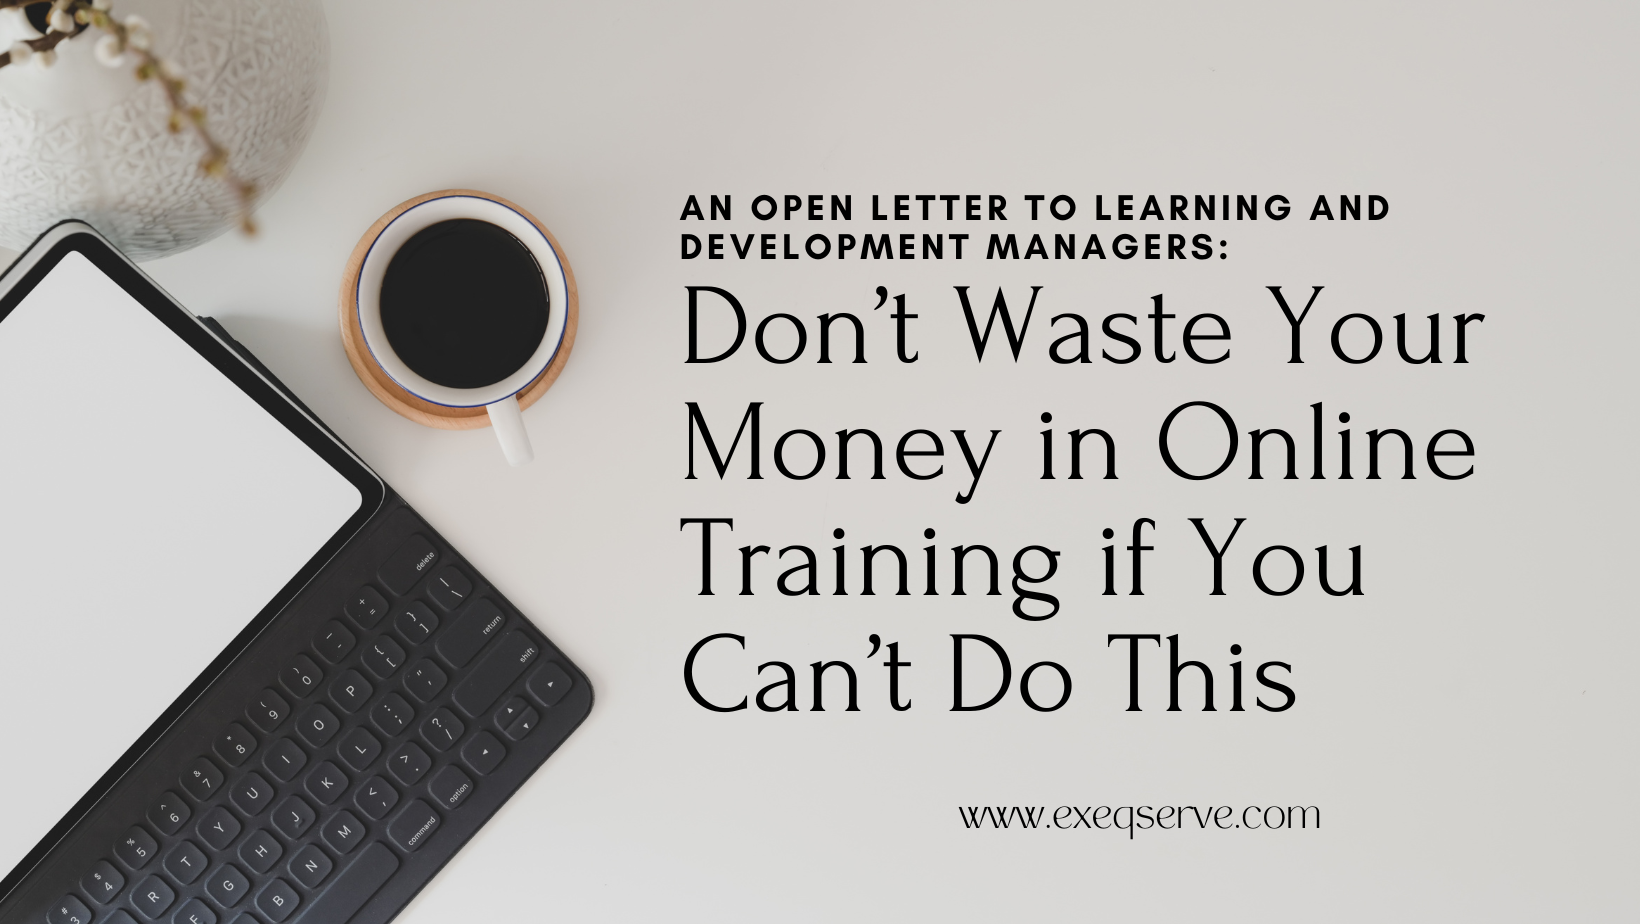 An Open Letter to Learning and Development Managers: Don’t Waste Your Money in Online Training if You Can’t Do This